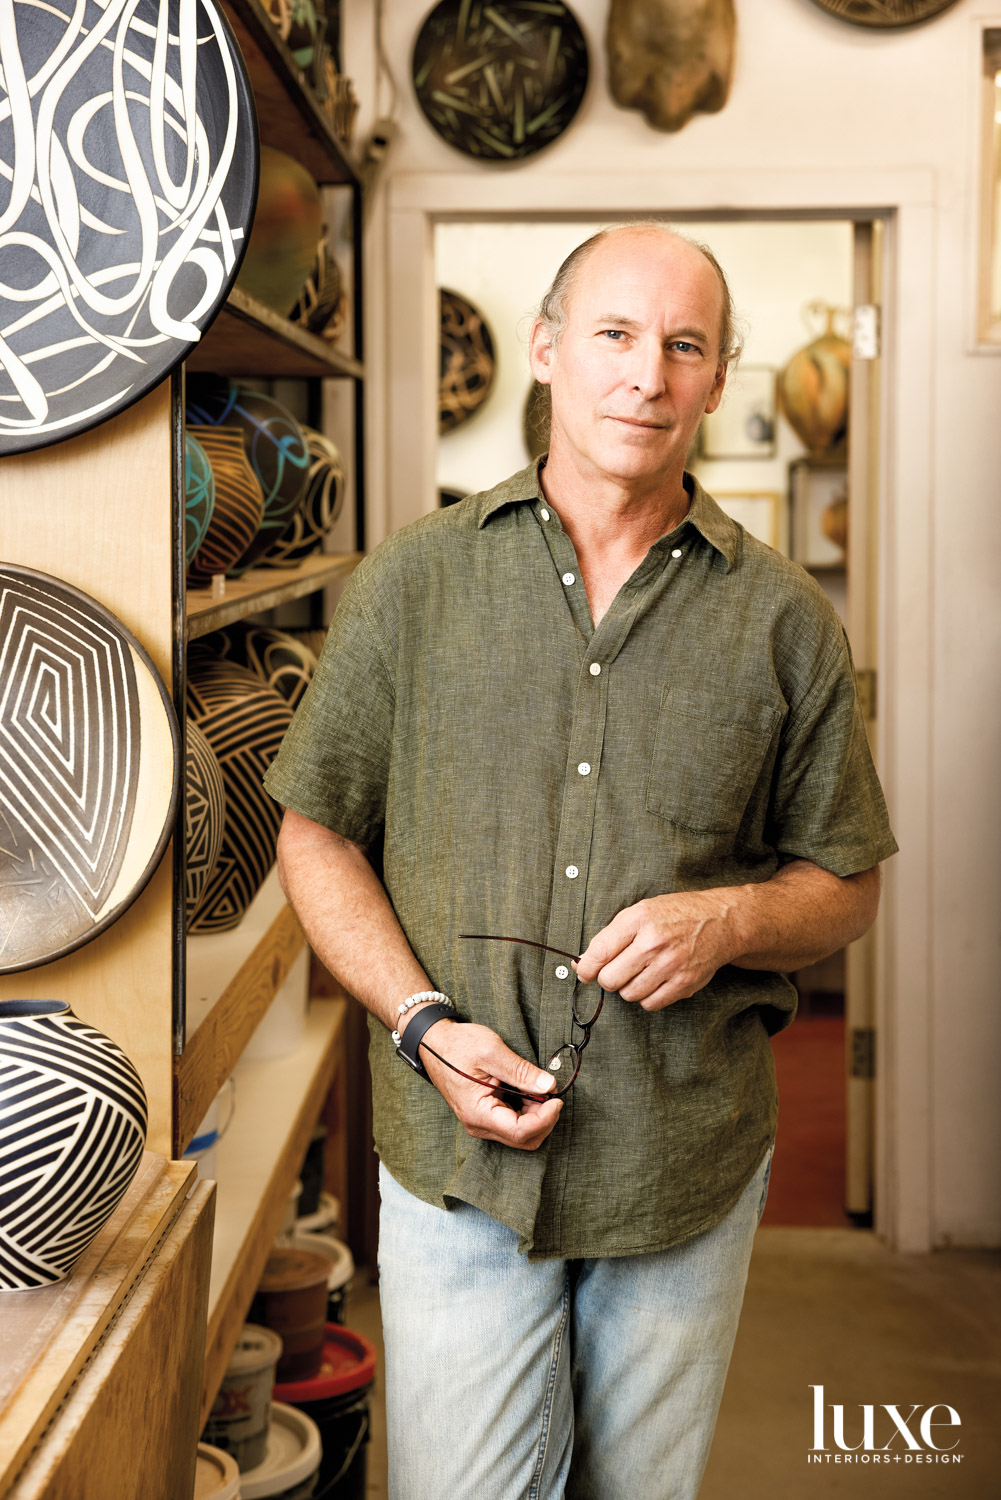 A man standing in a studio surrounded by ceramics.